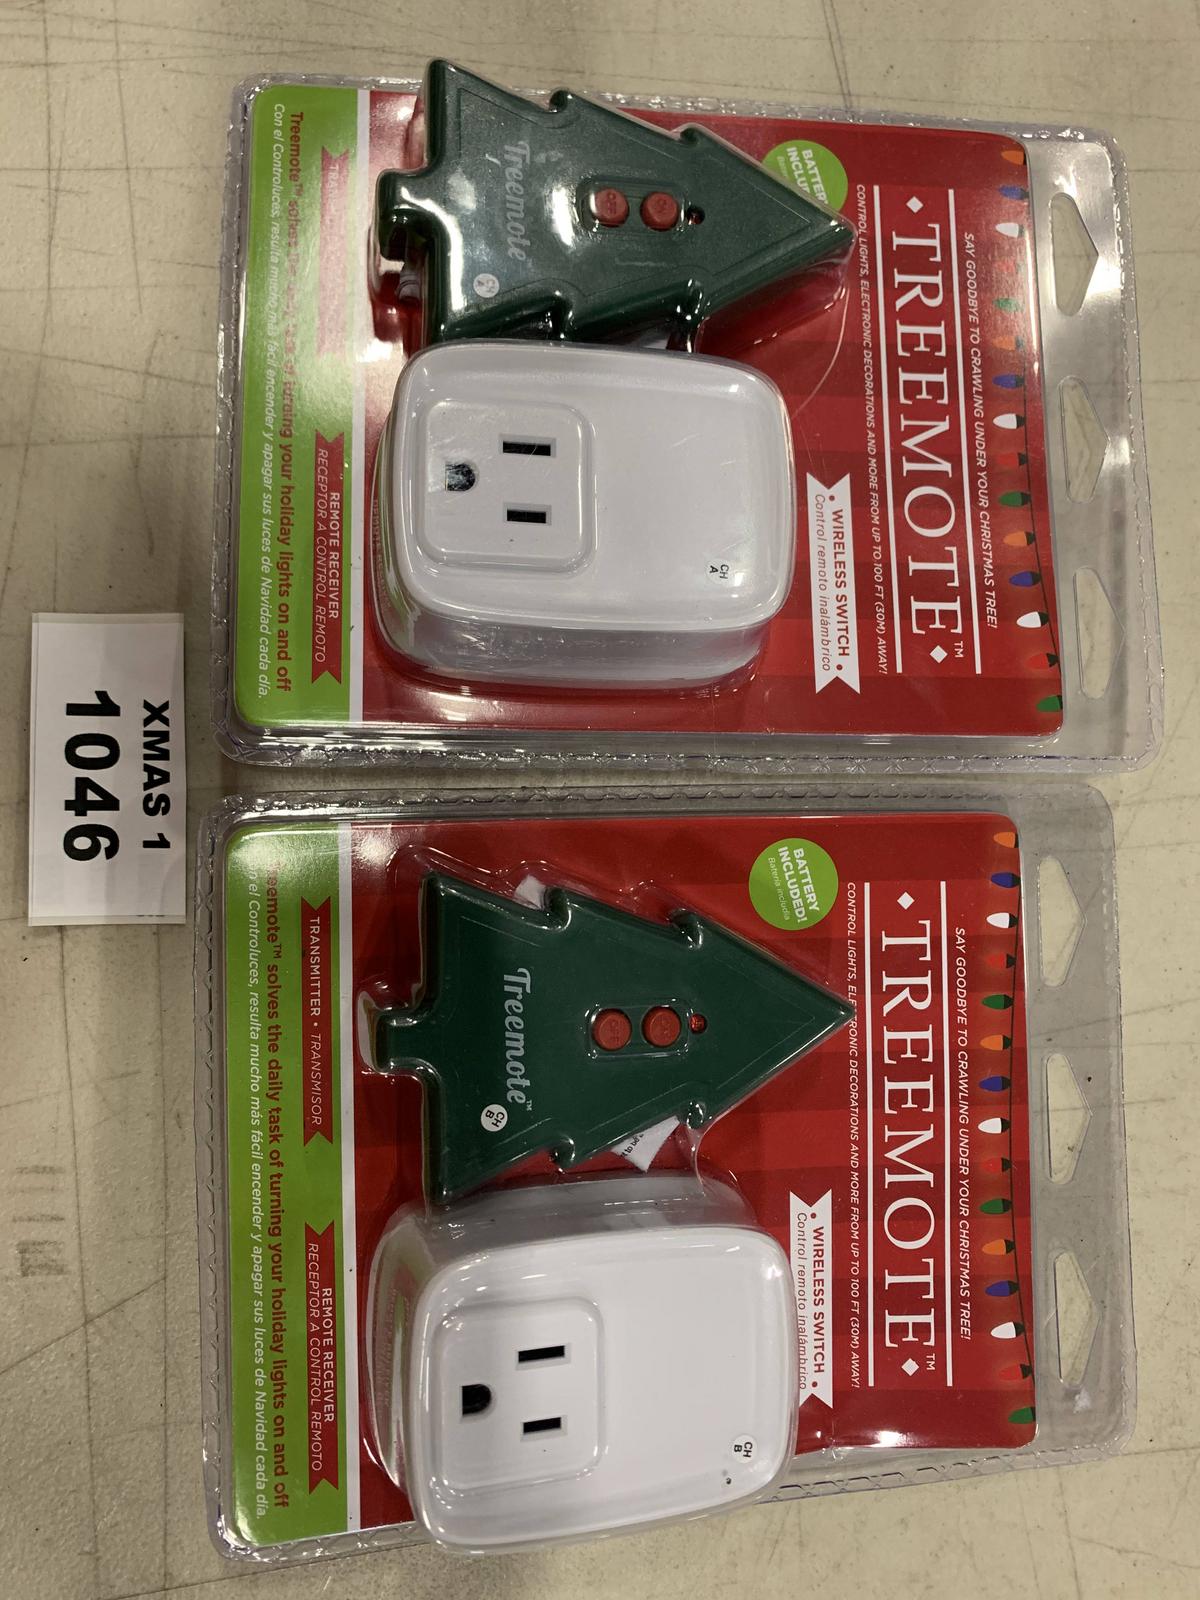 2) TREEMOTE WIRELESS REMOTE FOR CHRISTMAS TREES 